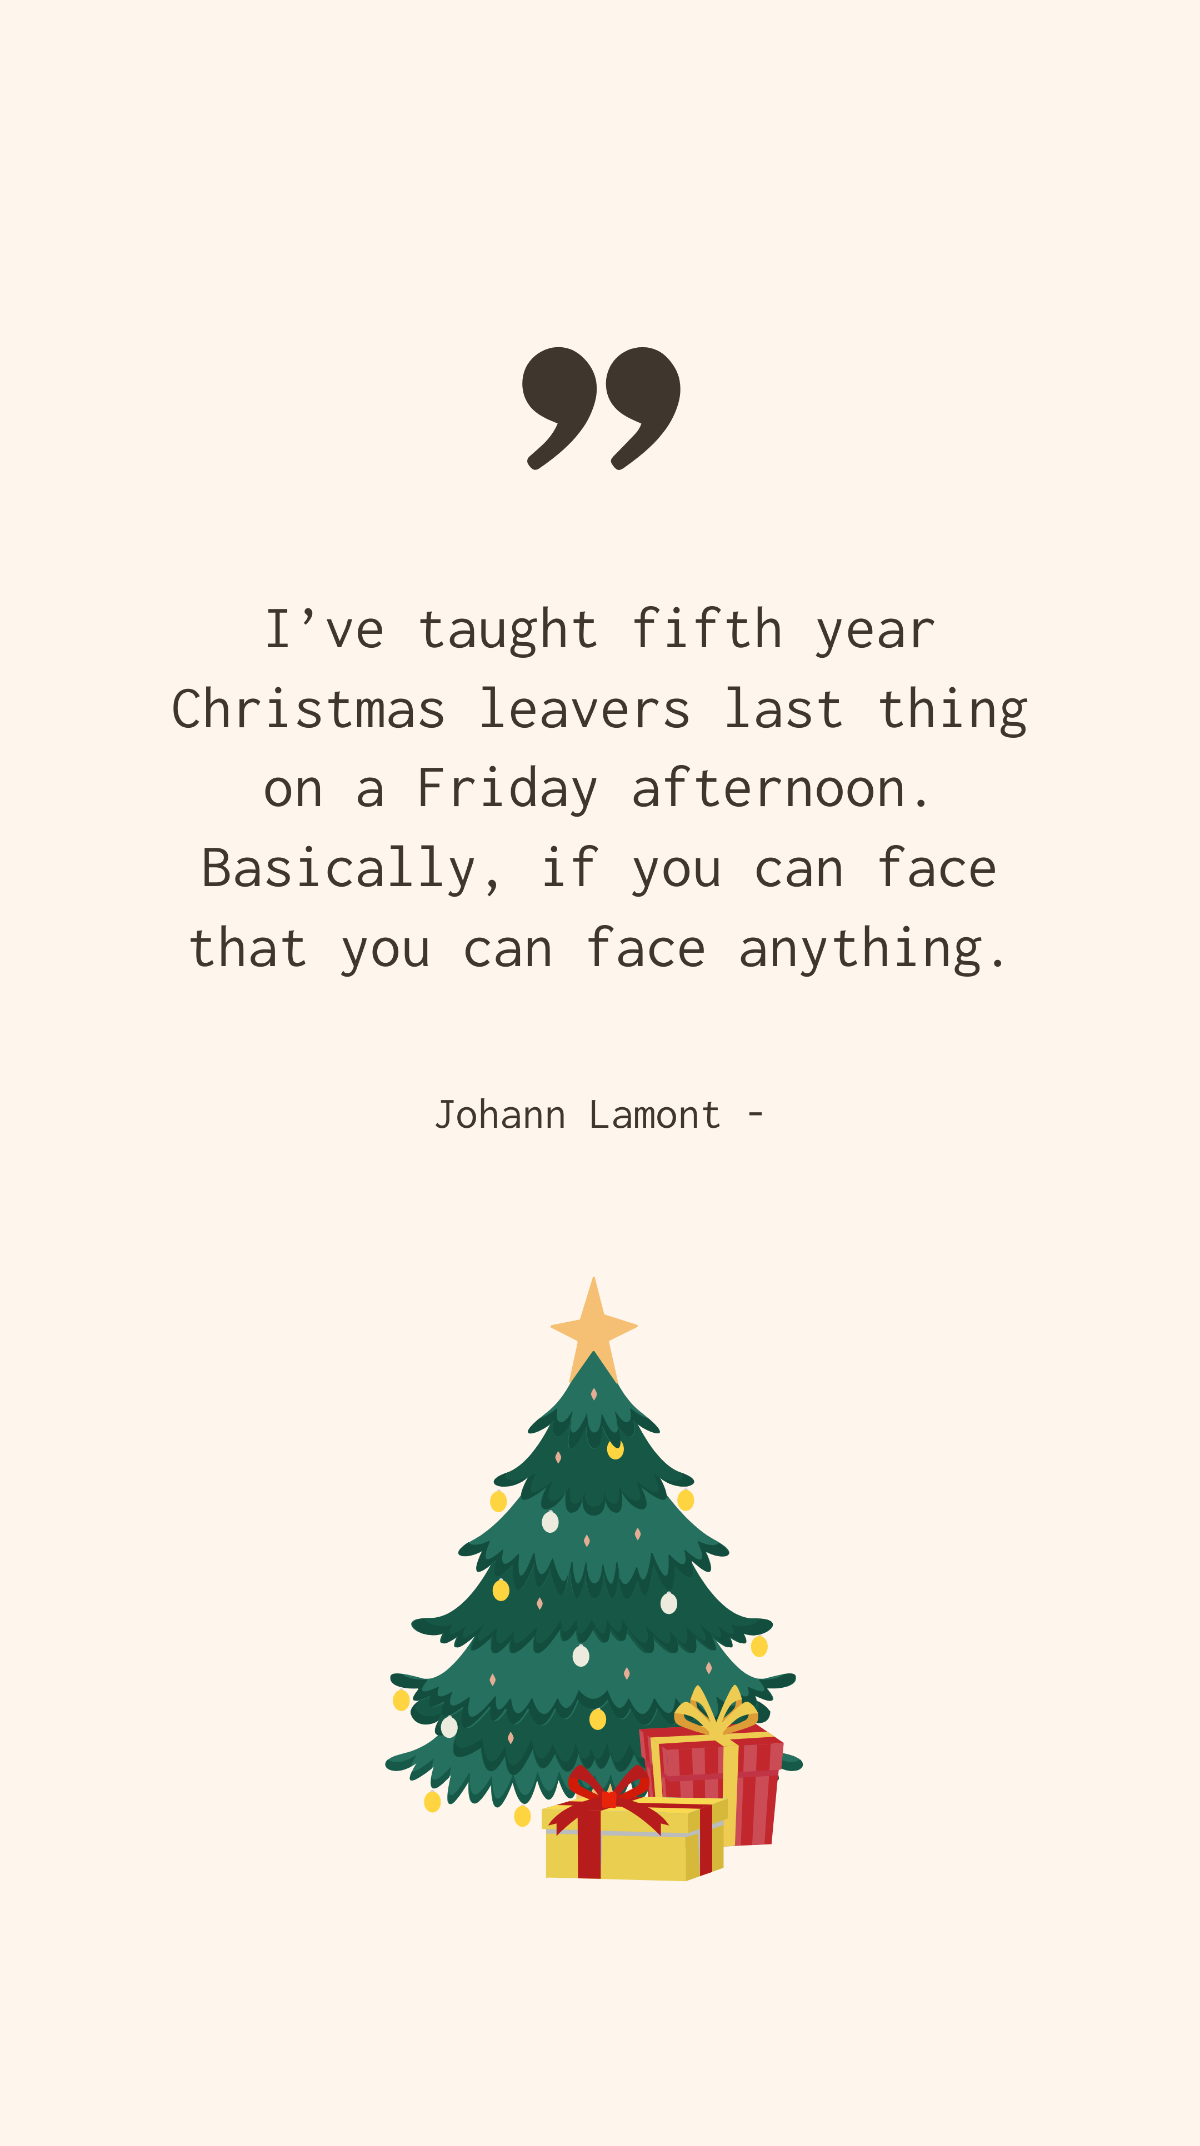 Johann Lamont - I’ve taught fifth year Christmas leavers last thing on a Friday afternoon. Basically, if you can face that you can face anything. Template